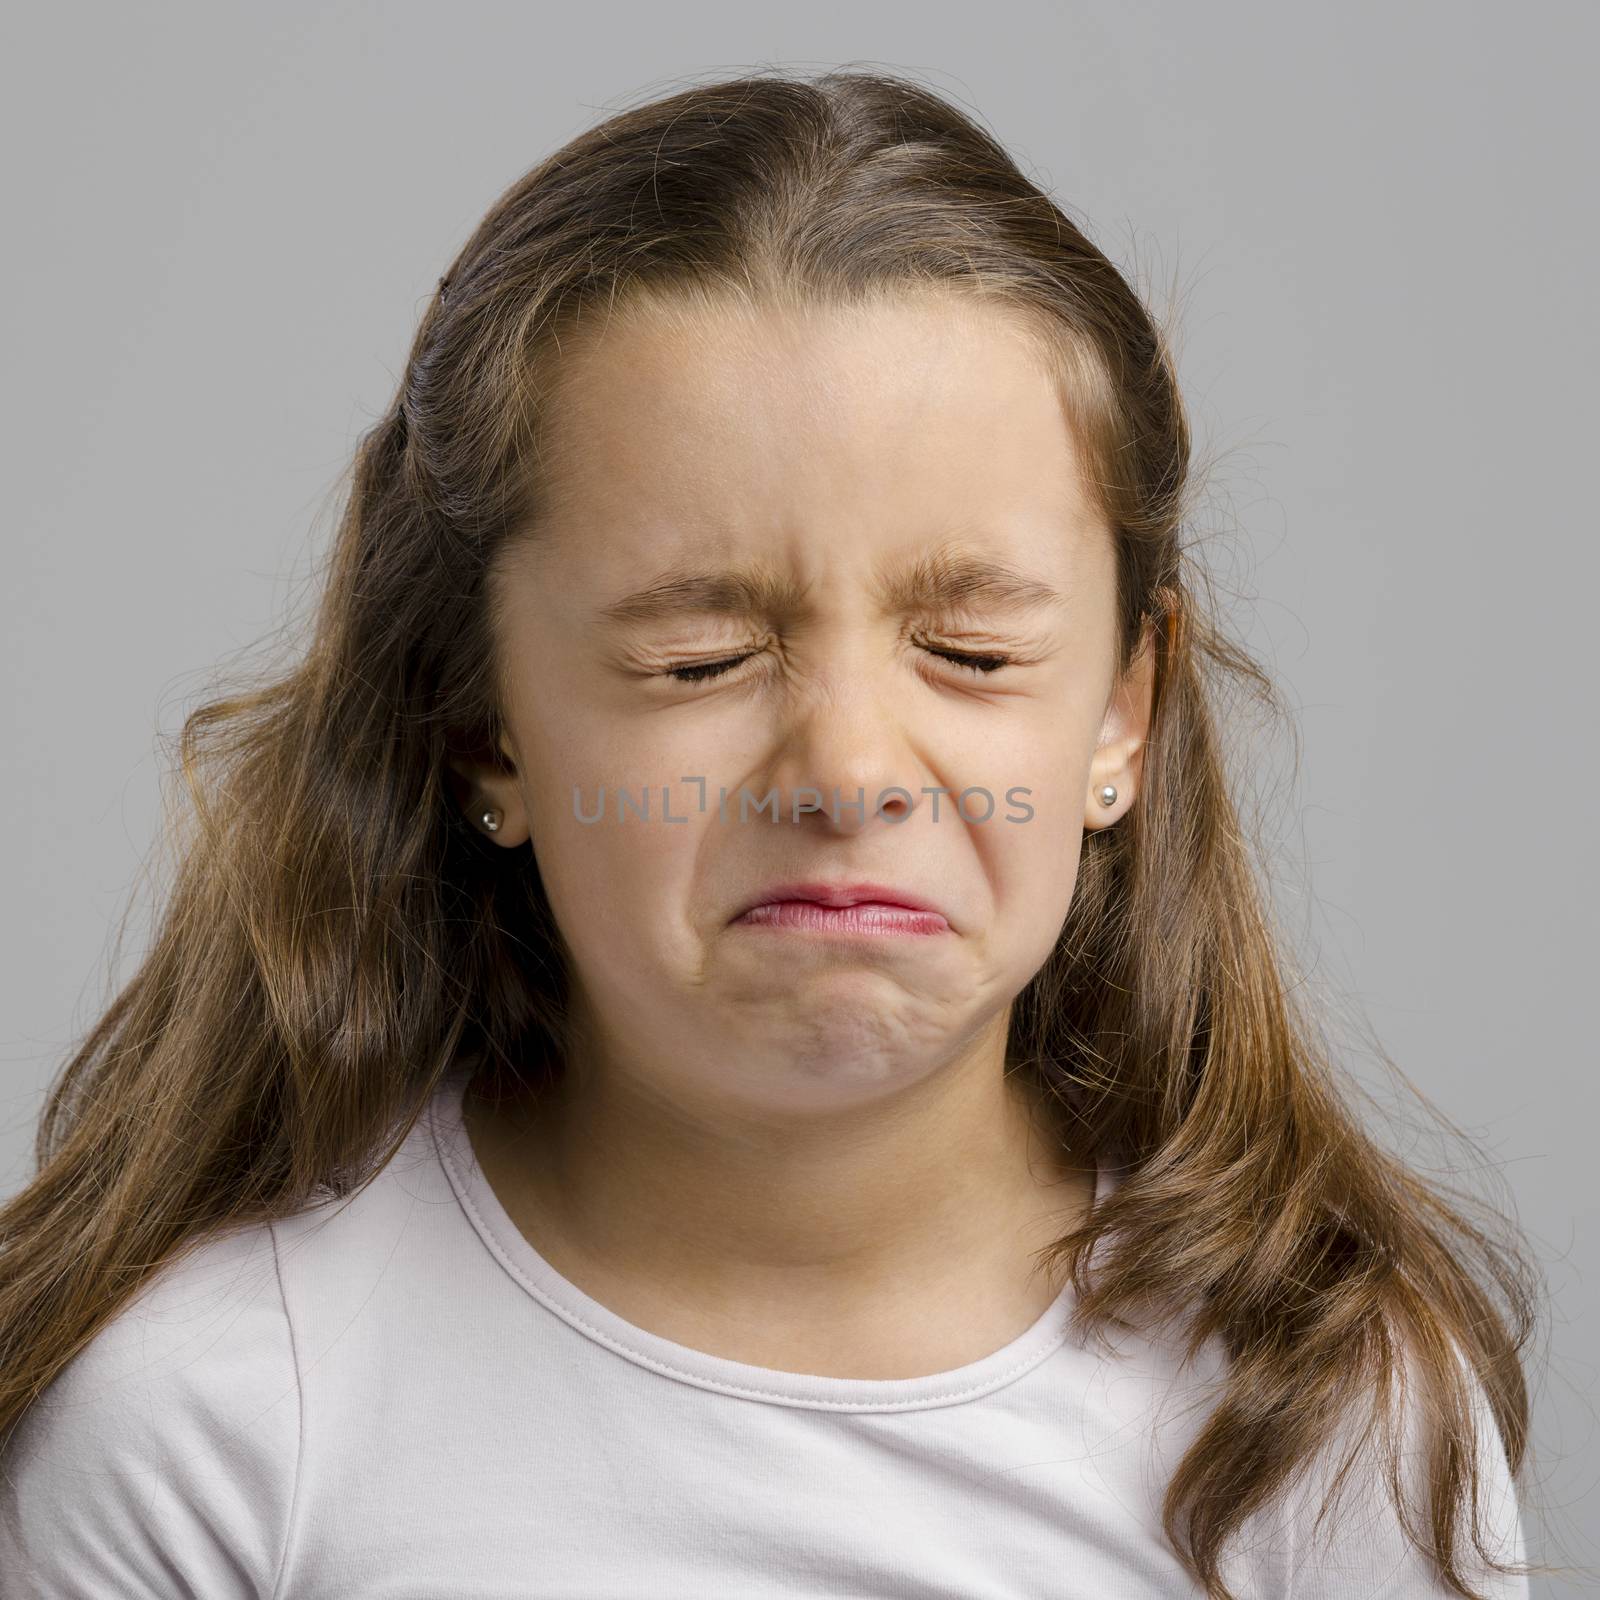 Studio portrait of a little girl crying